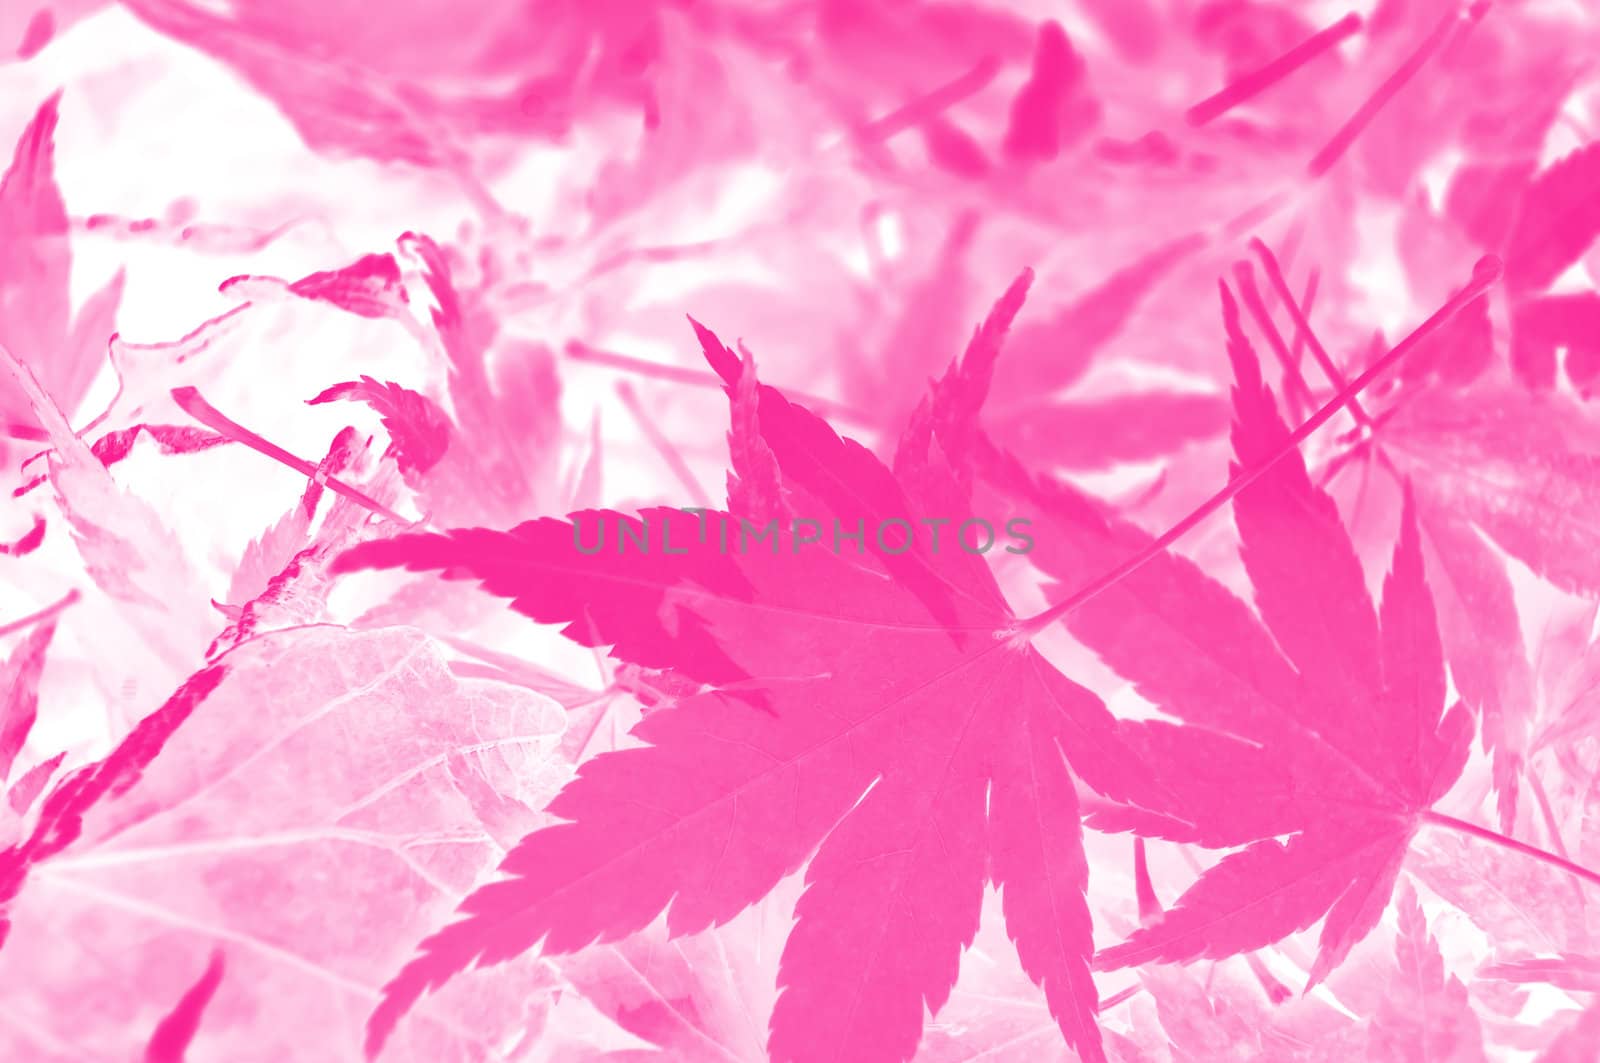 Abstract style capturing a selection of fallen leaves with a metallic pink filter and white background.